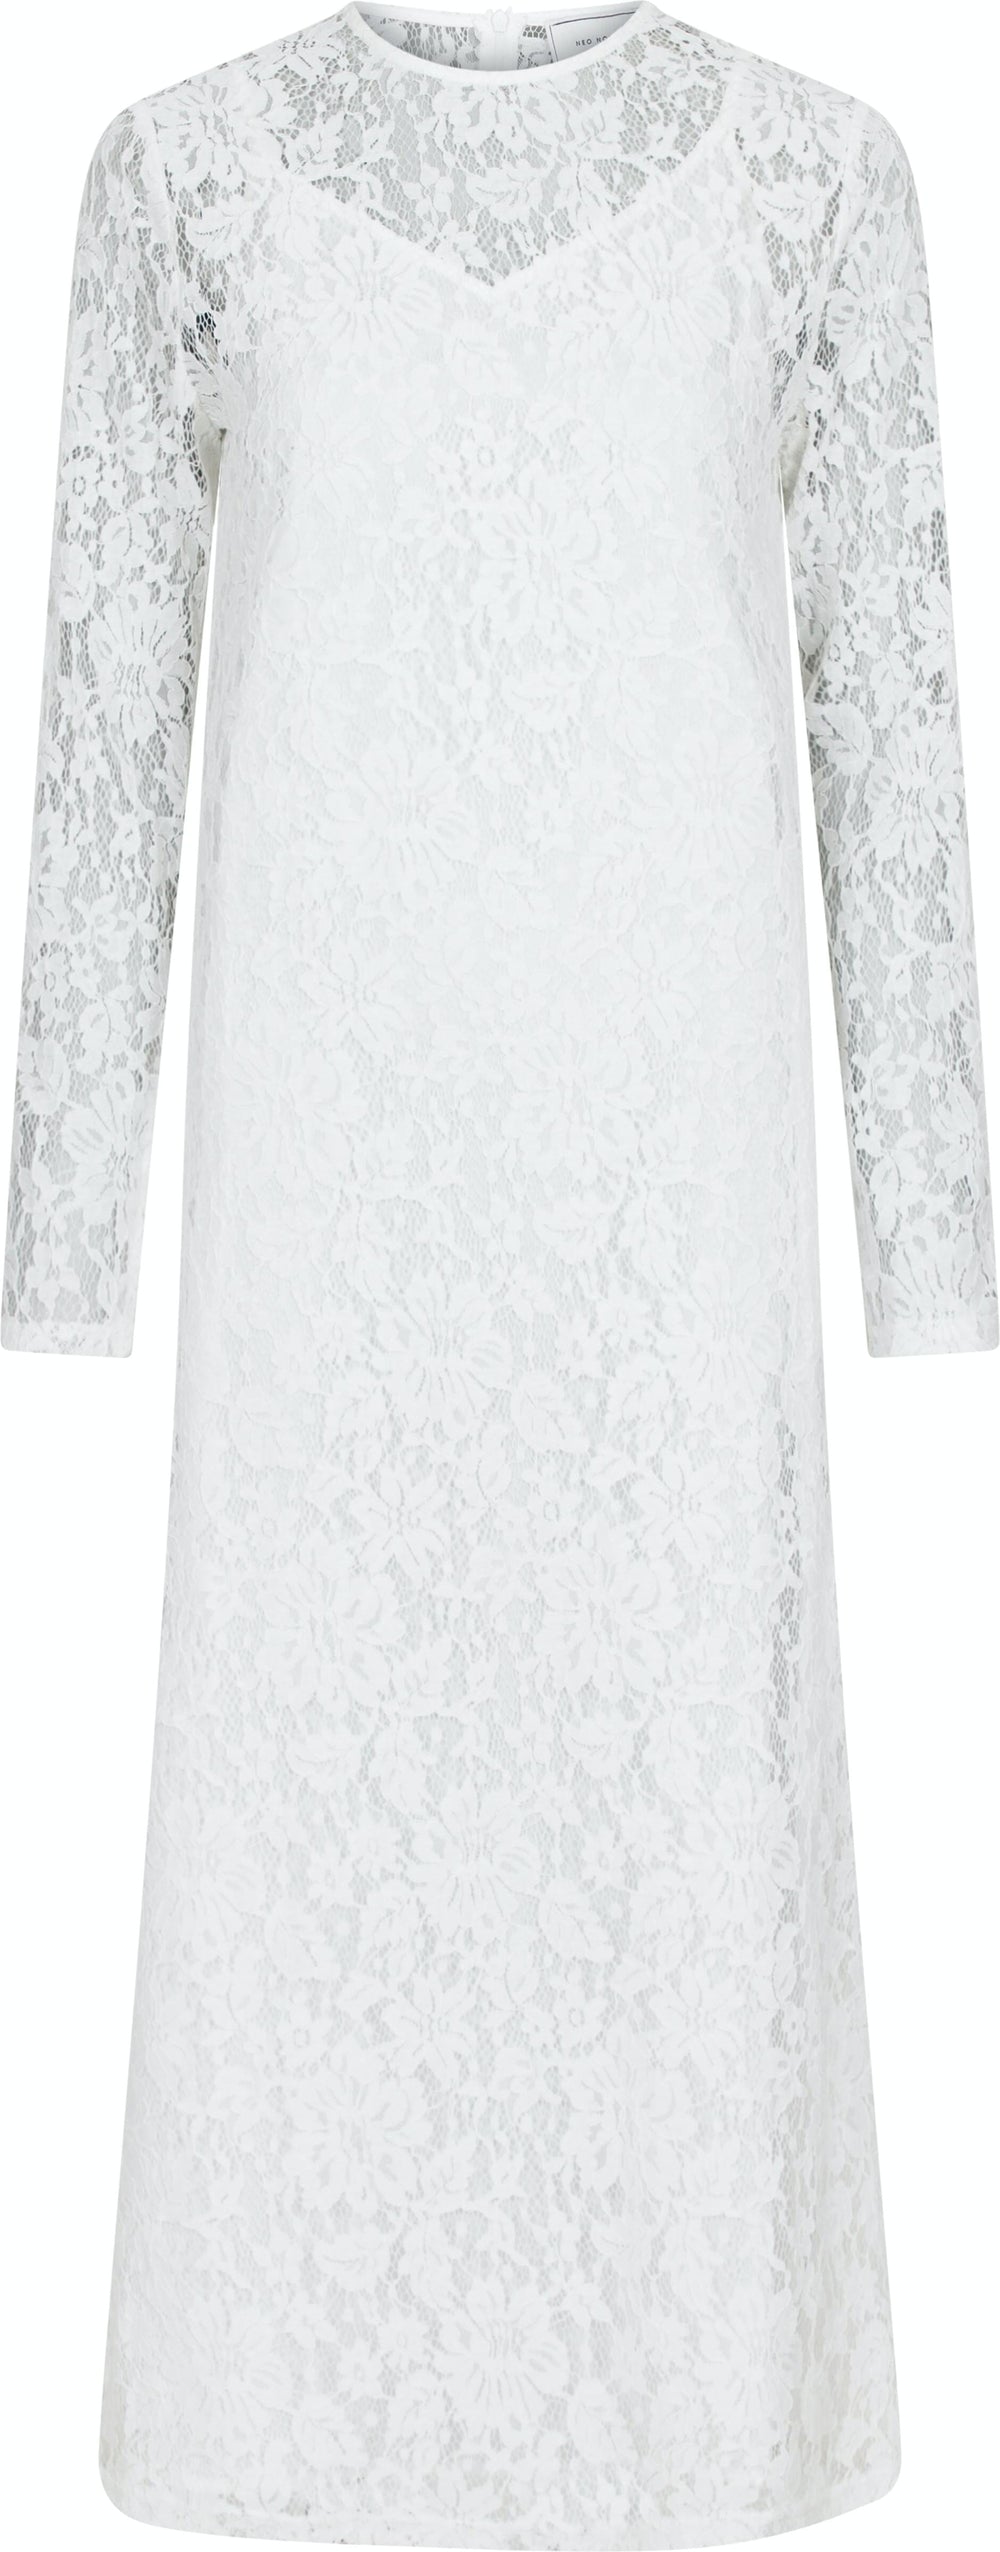 Neo Noir - Mary Lace Dress - White